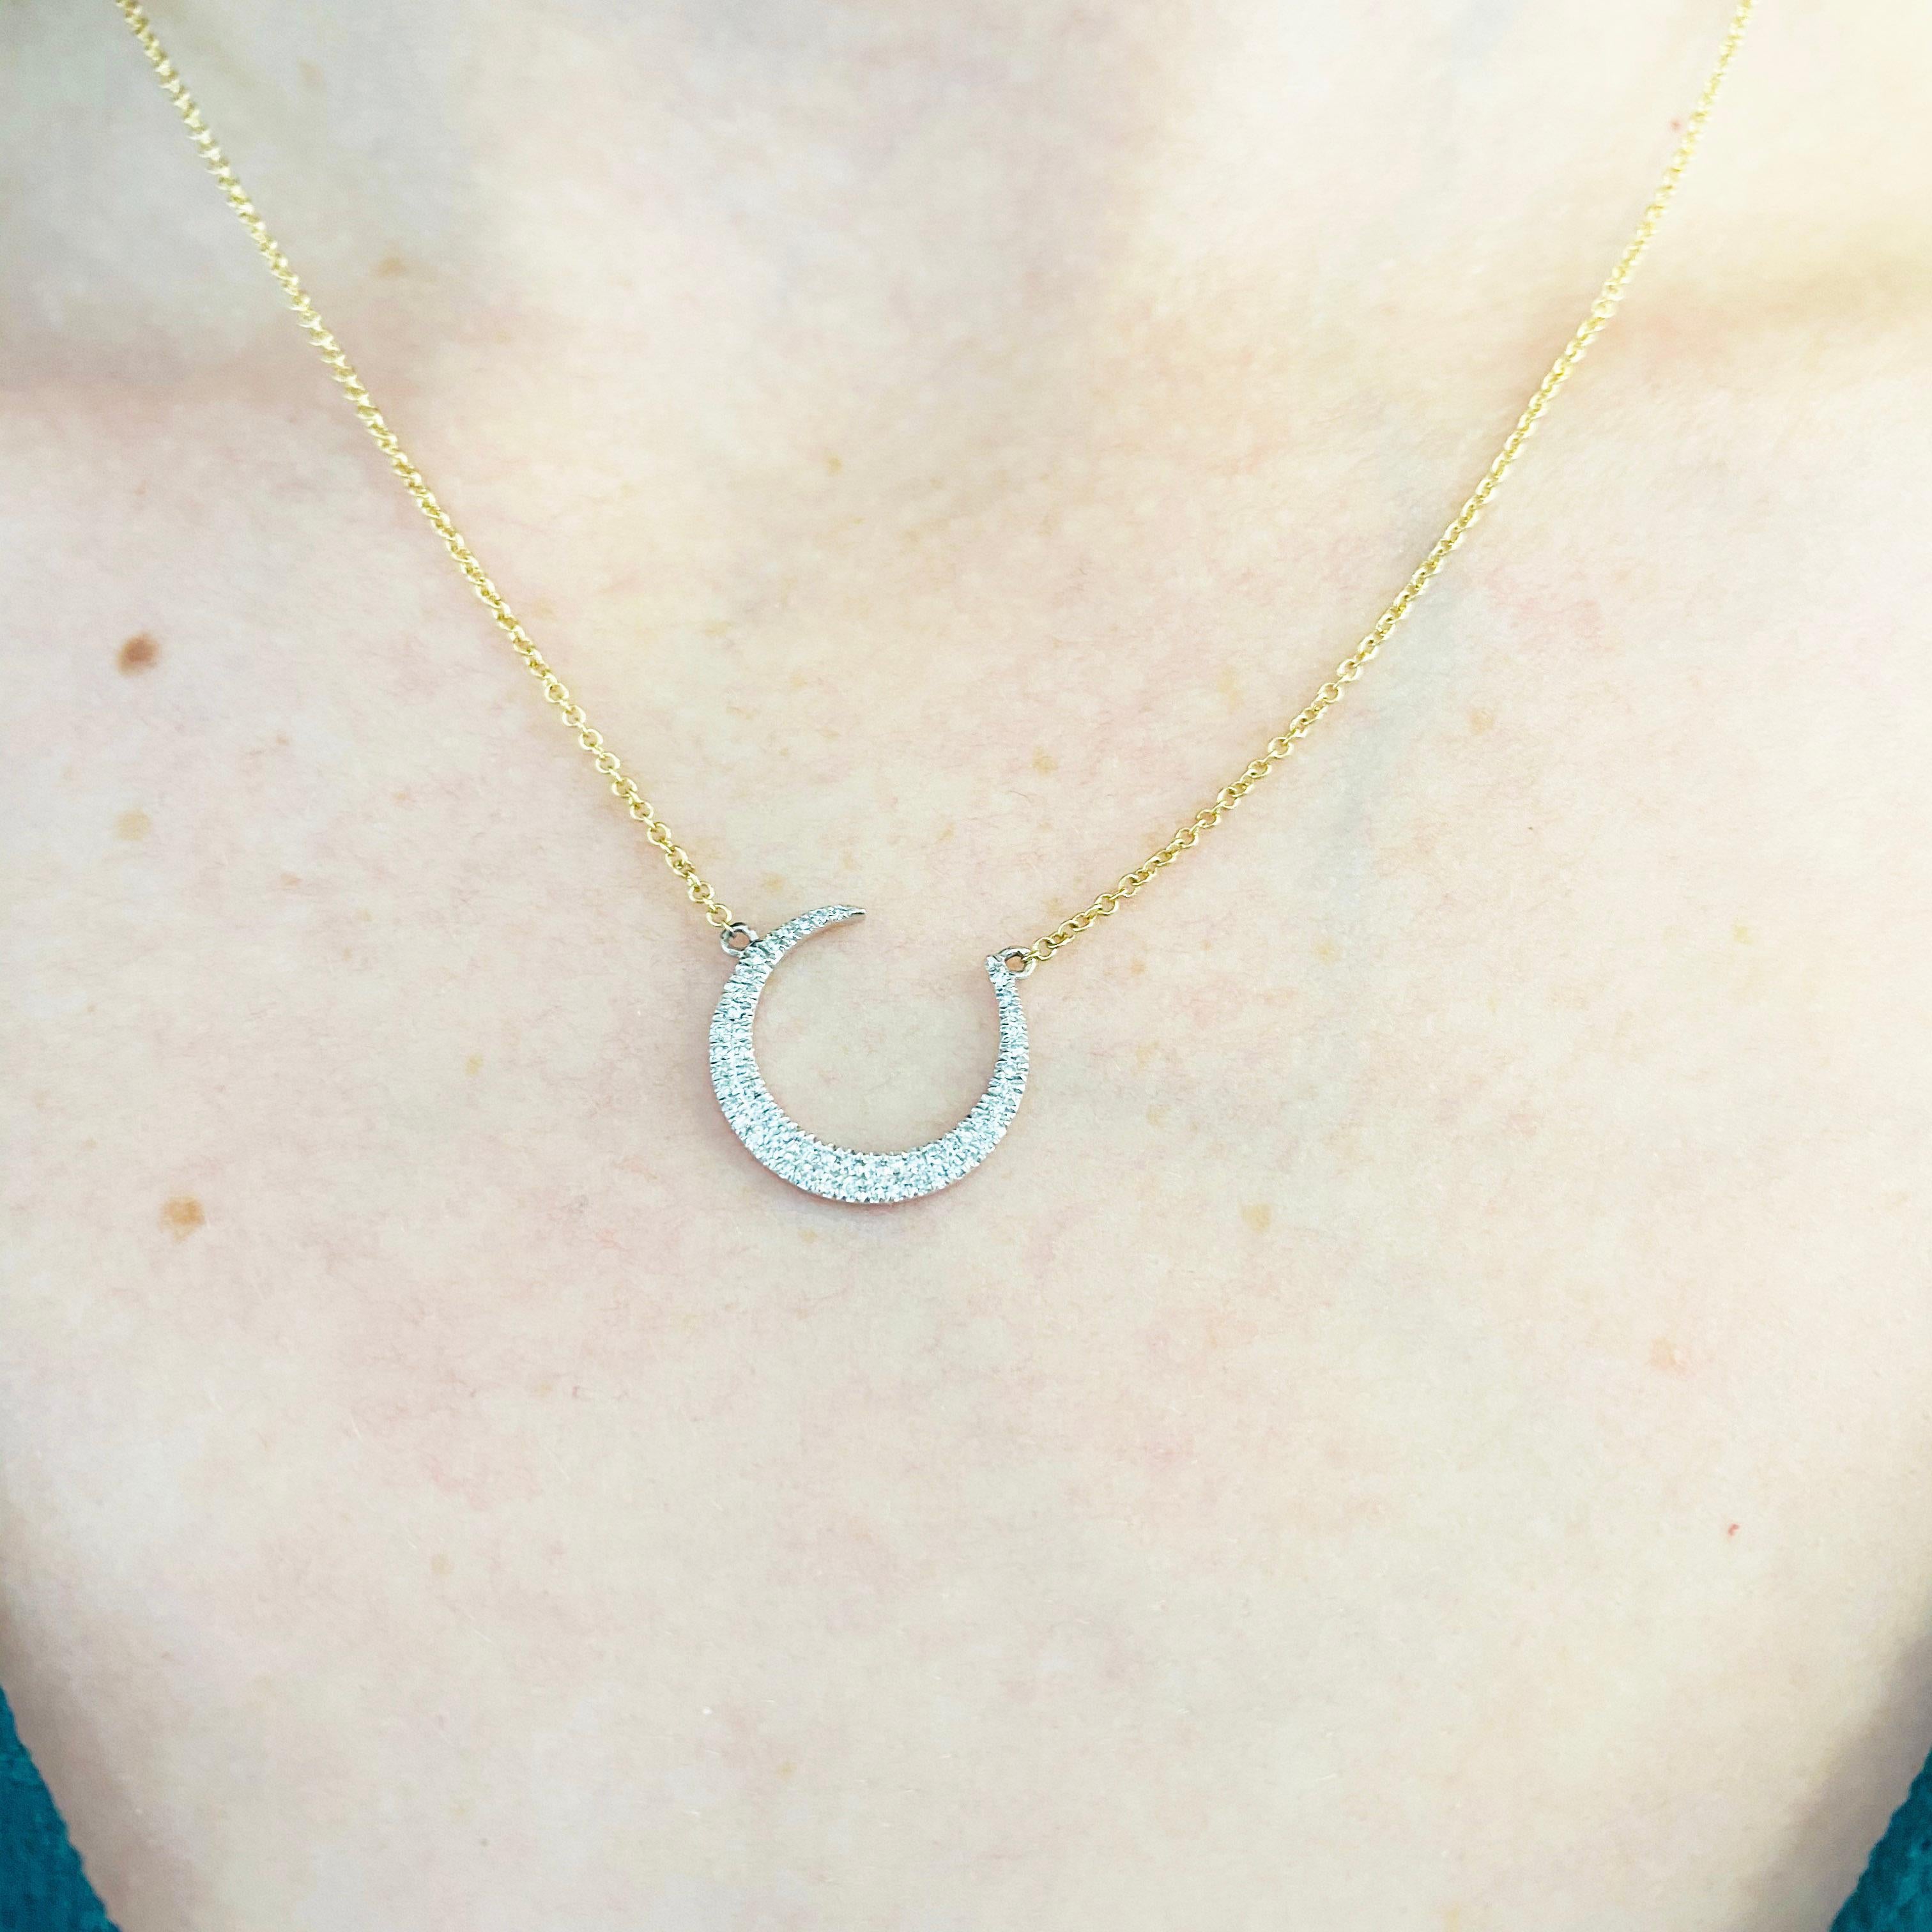 This gorgeous 14k white and yellow gold crescent moon pendant dripping with diamonds is the perfect mix between classic and trendy! This necklace is very fashionable and can add a touch of style to any outfit, yet it is also classy enough to pair